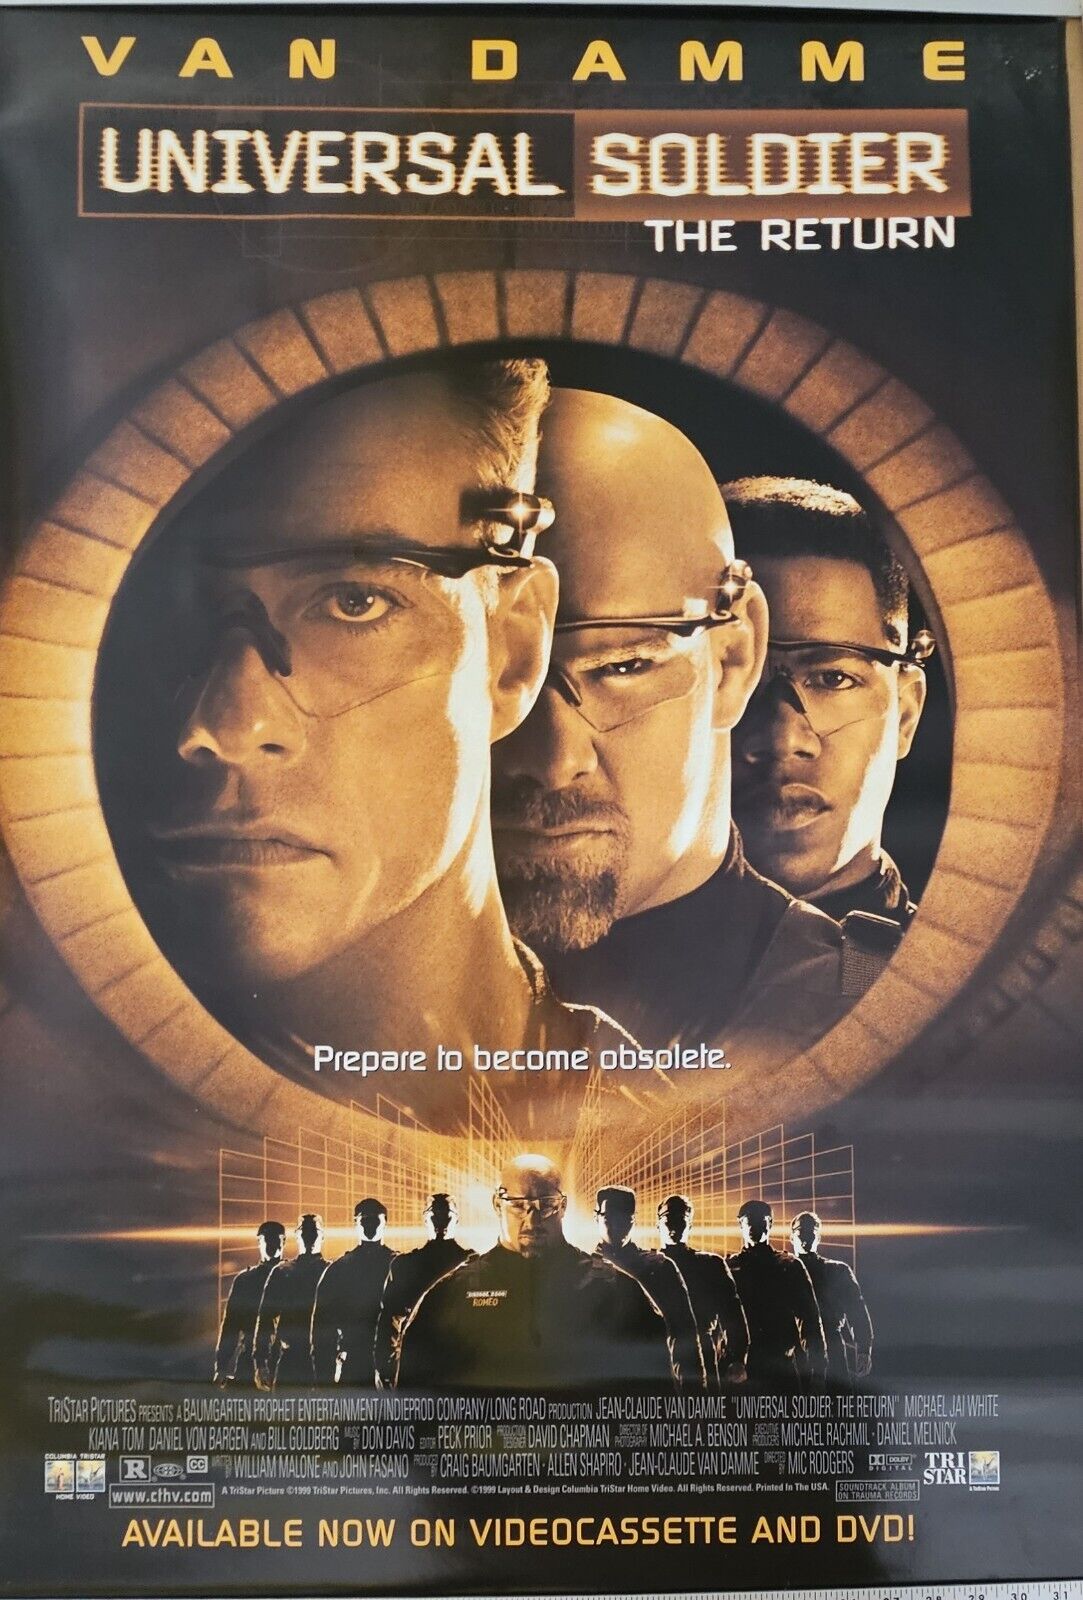 Van Damme and Goldberg in Universal soldier  The return 27 x 40 DVD poster